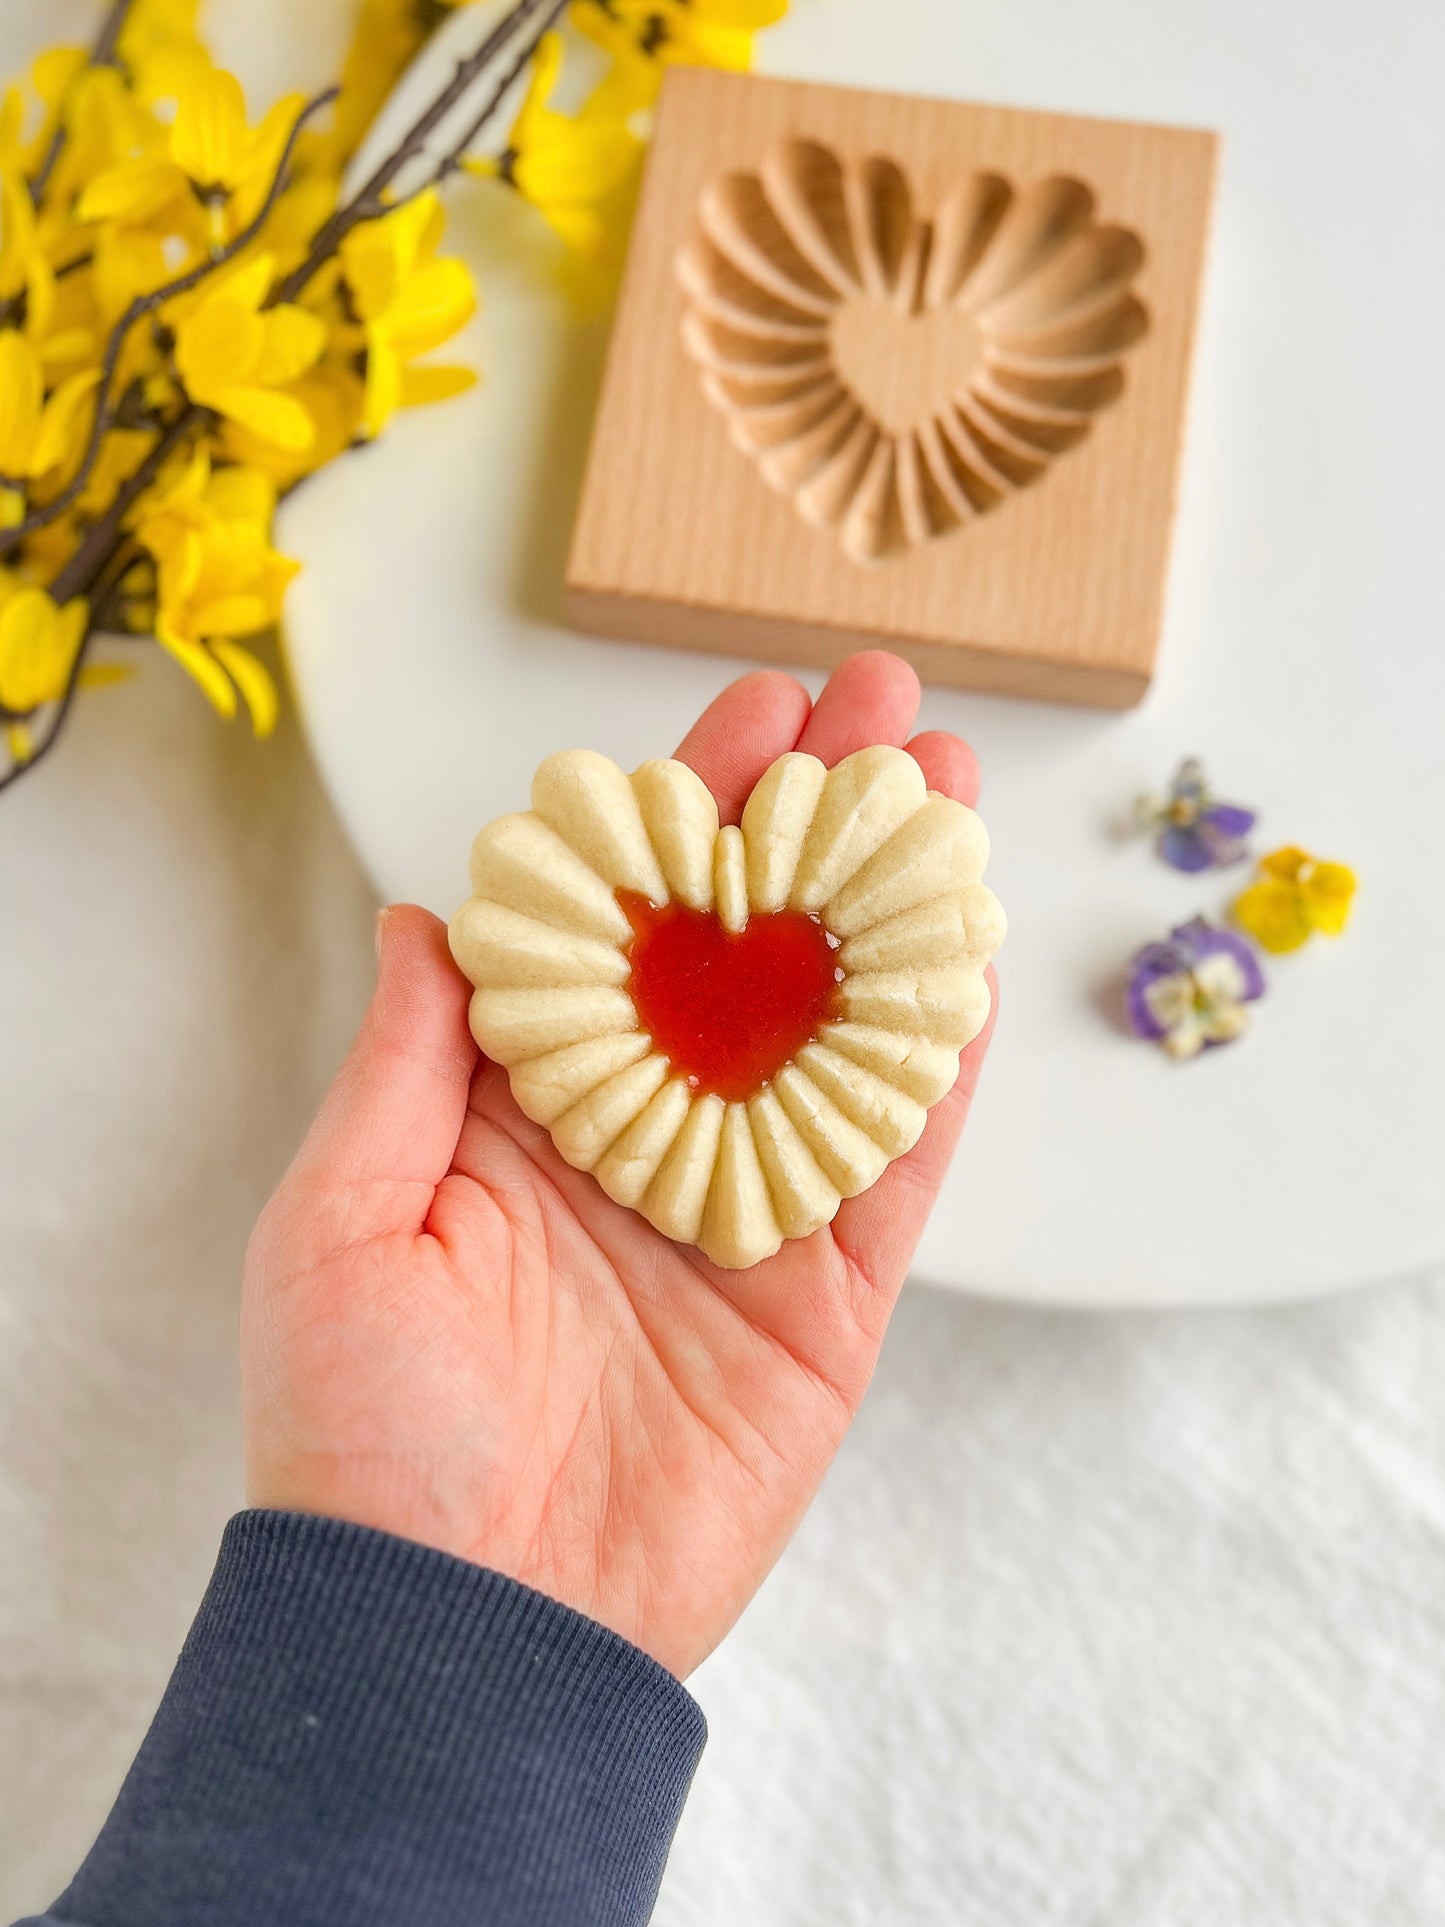 Holz Cookie Form Heart 3d